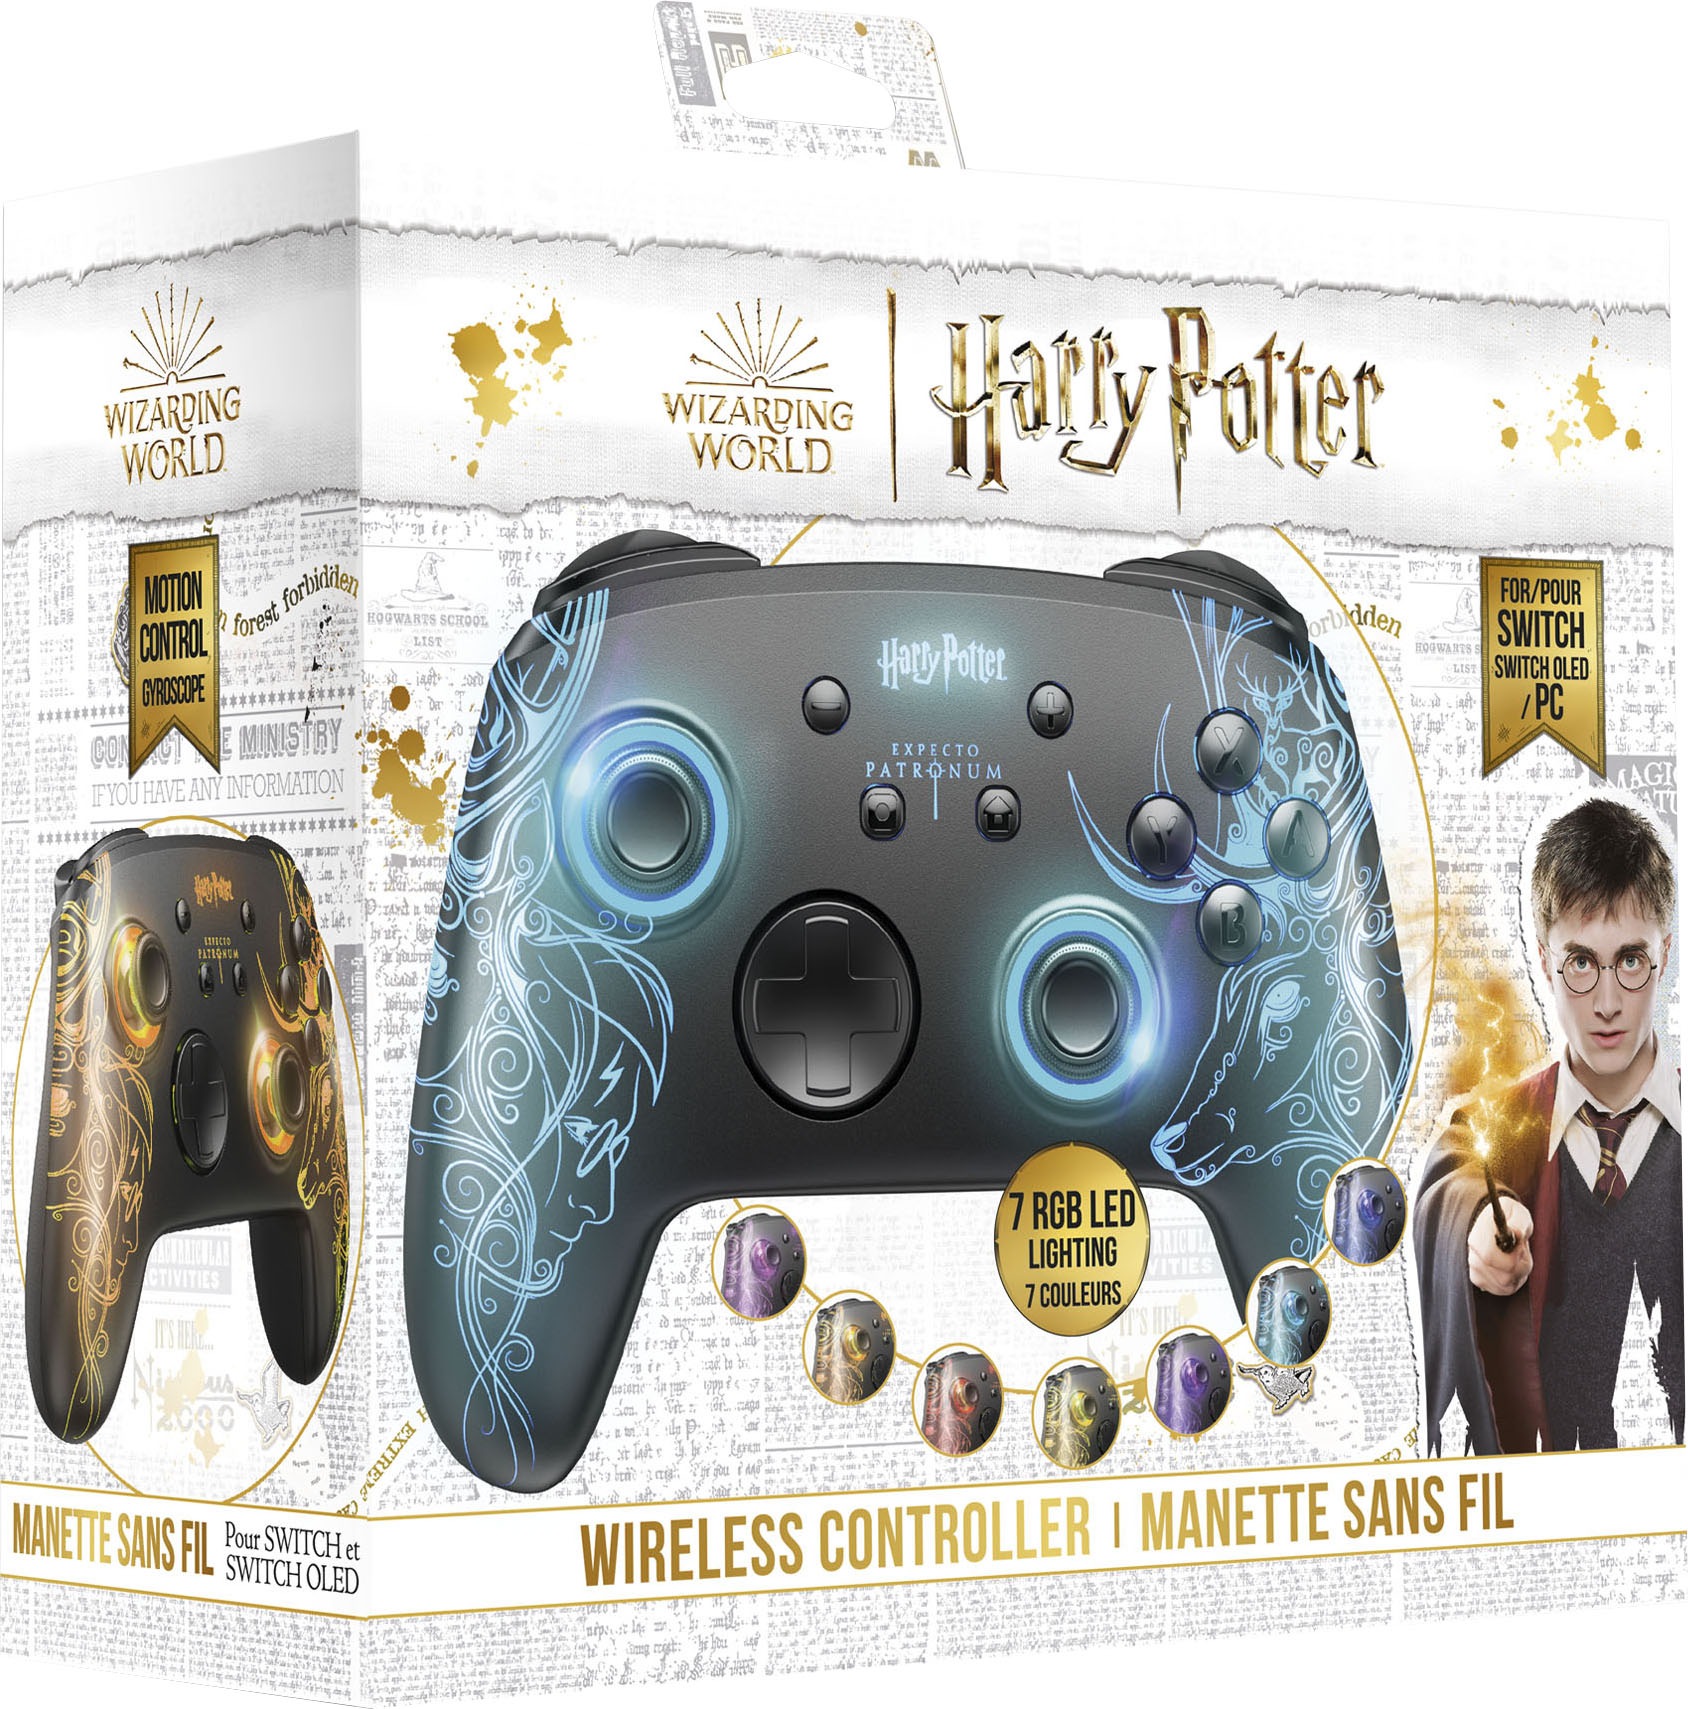 Freaks and Geeks Nintendo-Controller Stag bei Potter Wireless« OTTO jetzt online Patronus »Harry